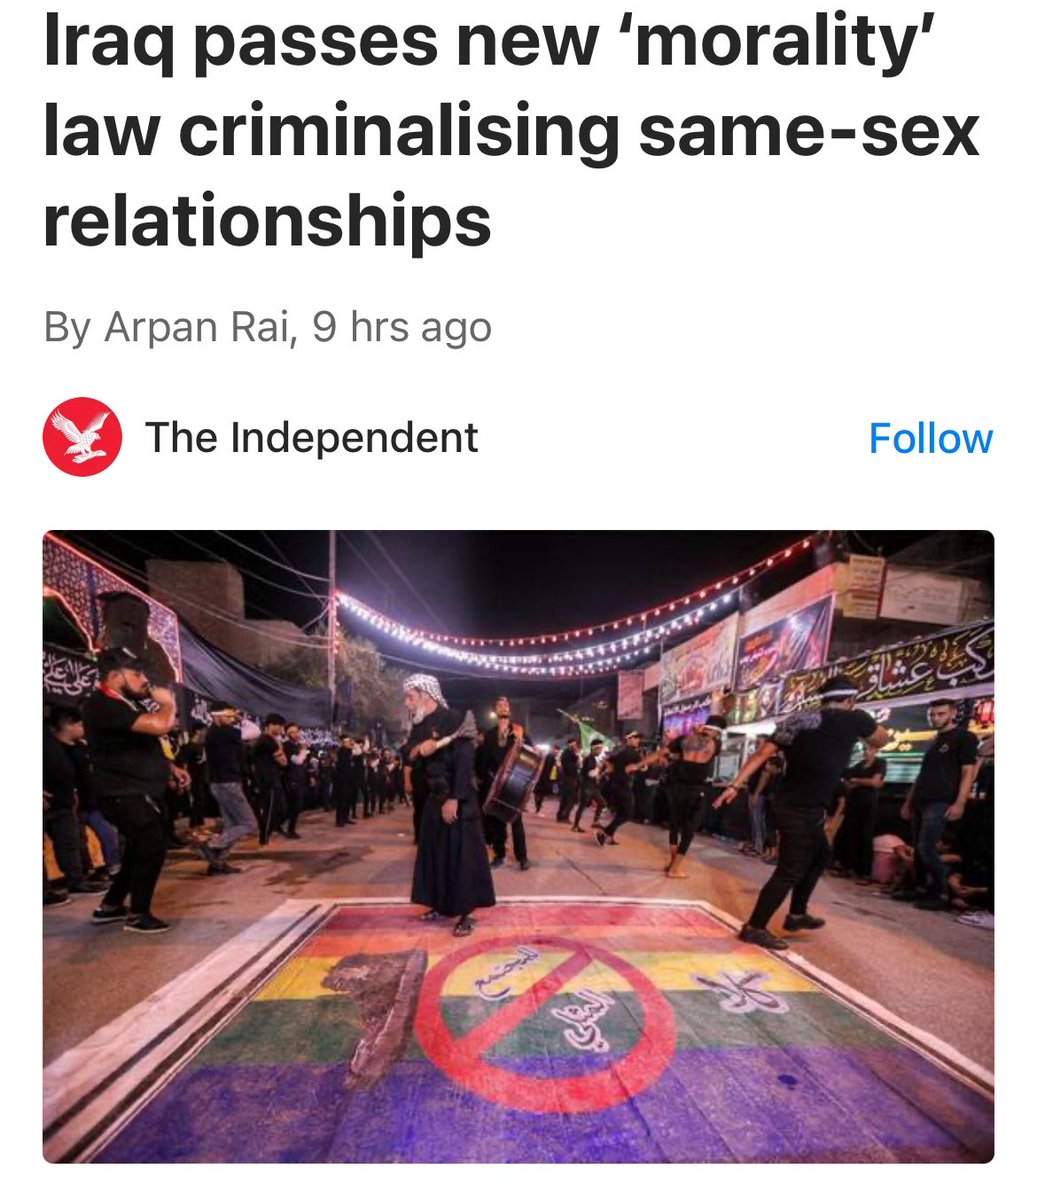 Iraq just passed a sweeping law that criminalizes same-sex relationships and could see gay people sentenced to up to 15 years in prison if convicted. Any alphabet person that supports or fights for Islam is genuinely retarded. Idk how else to put it.